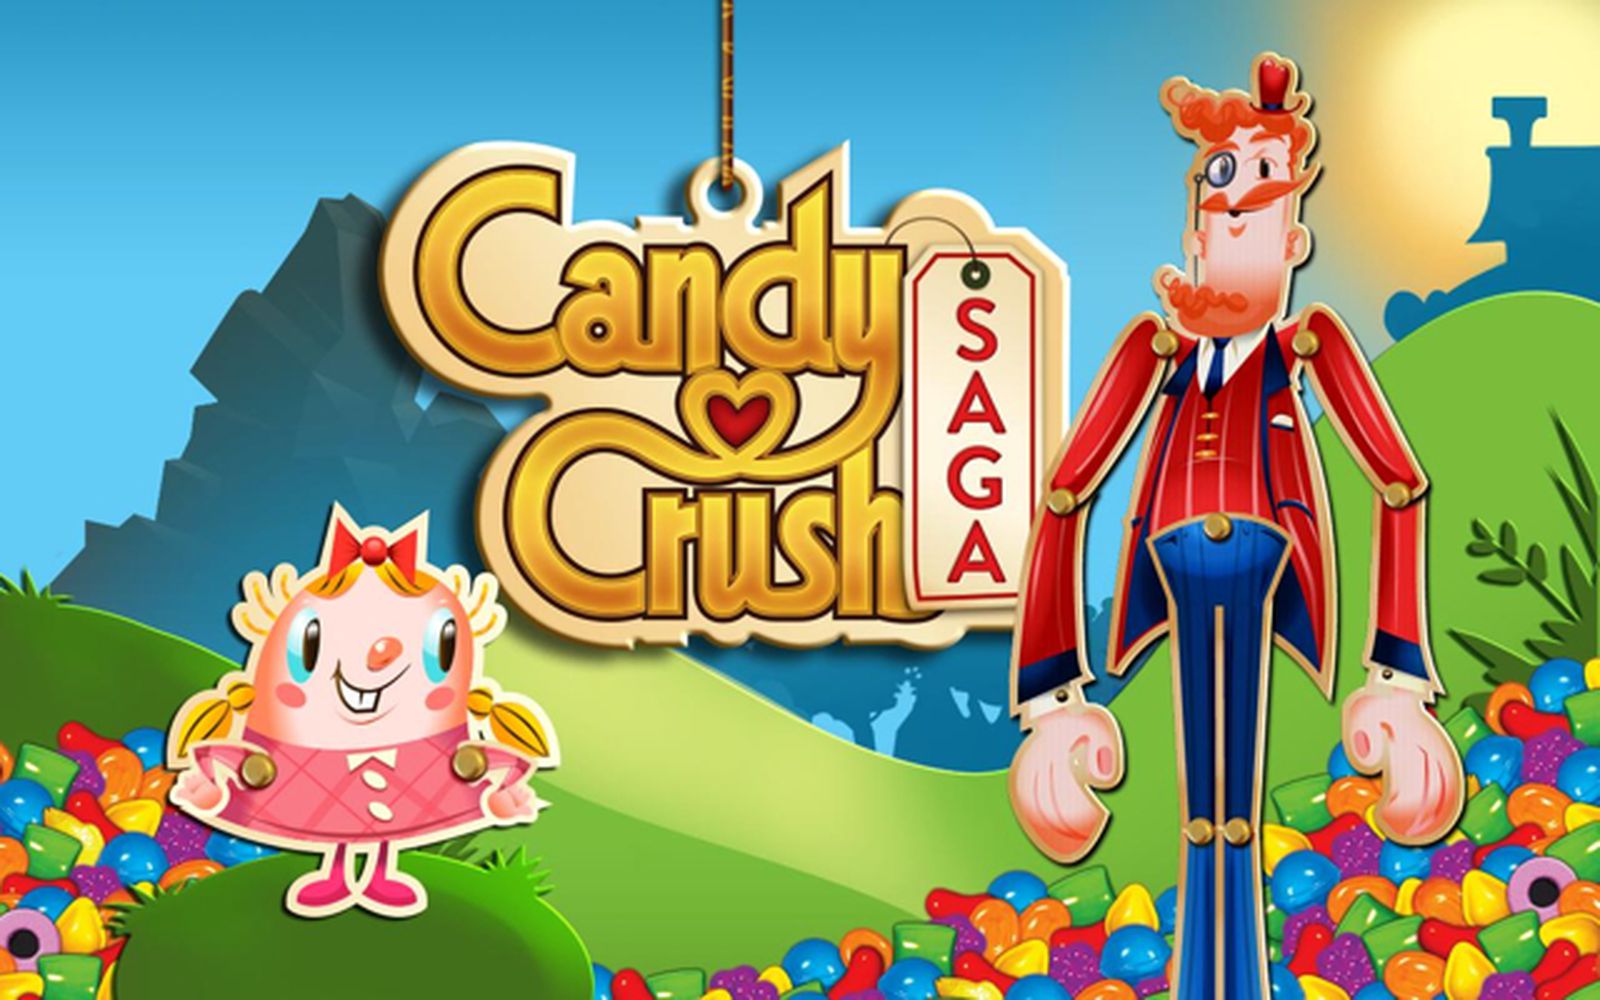 Users spent 1.33 billion on in-app purchases in Candy Crush Saga